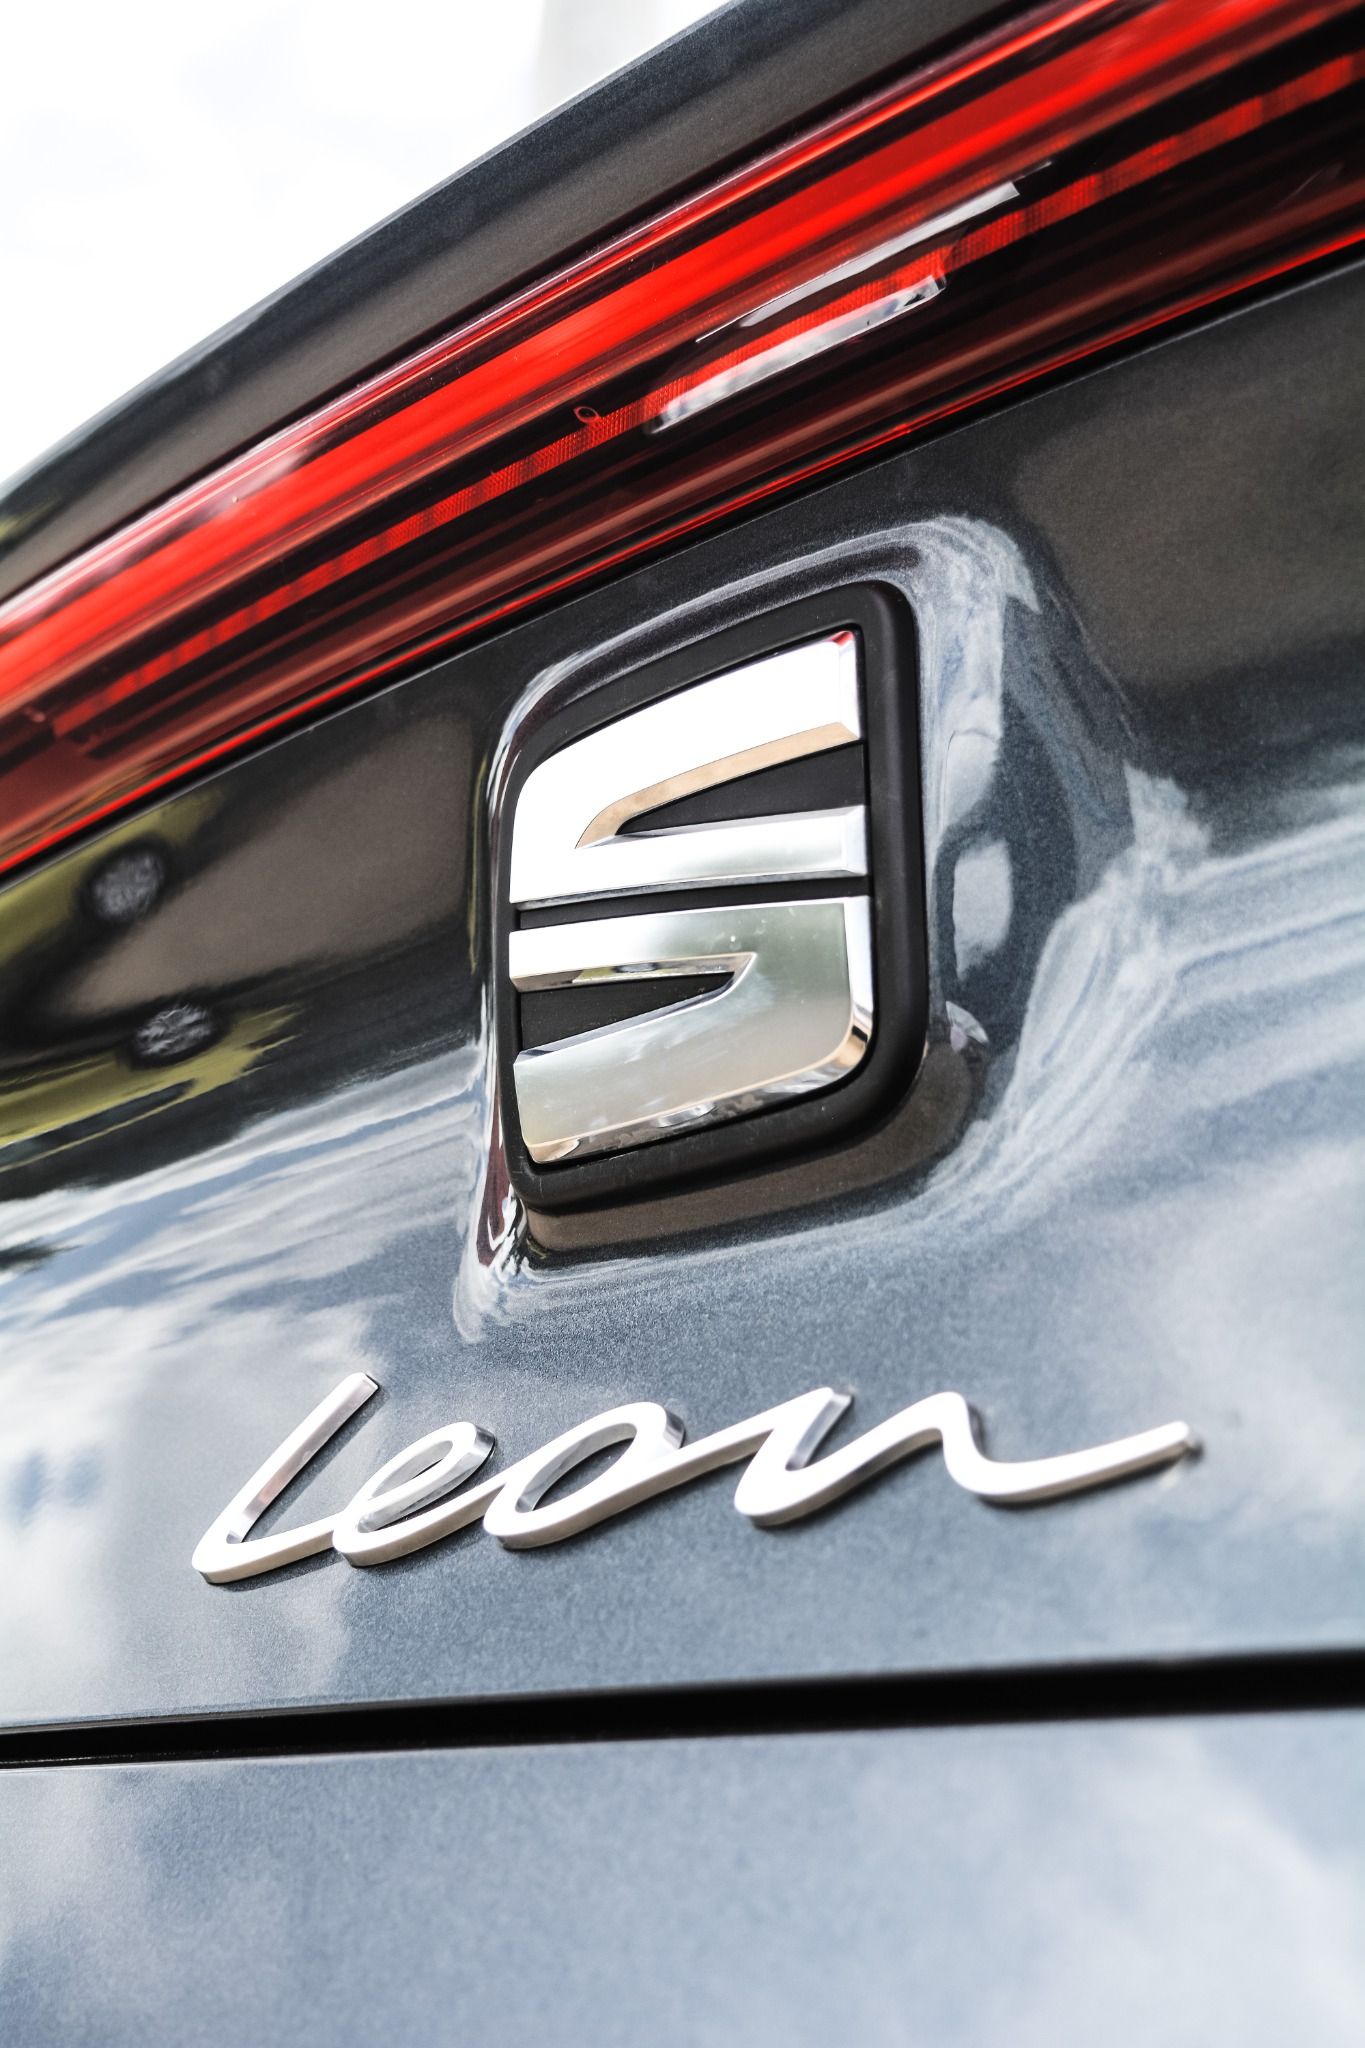 close up of New Leon badging and the Seat Logo boot release on a grey vehicle